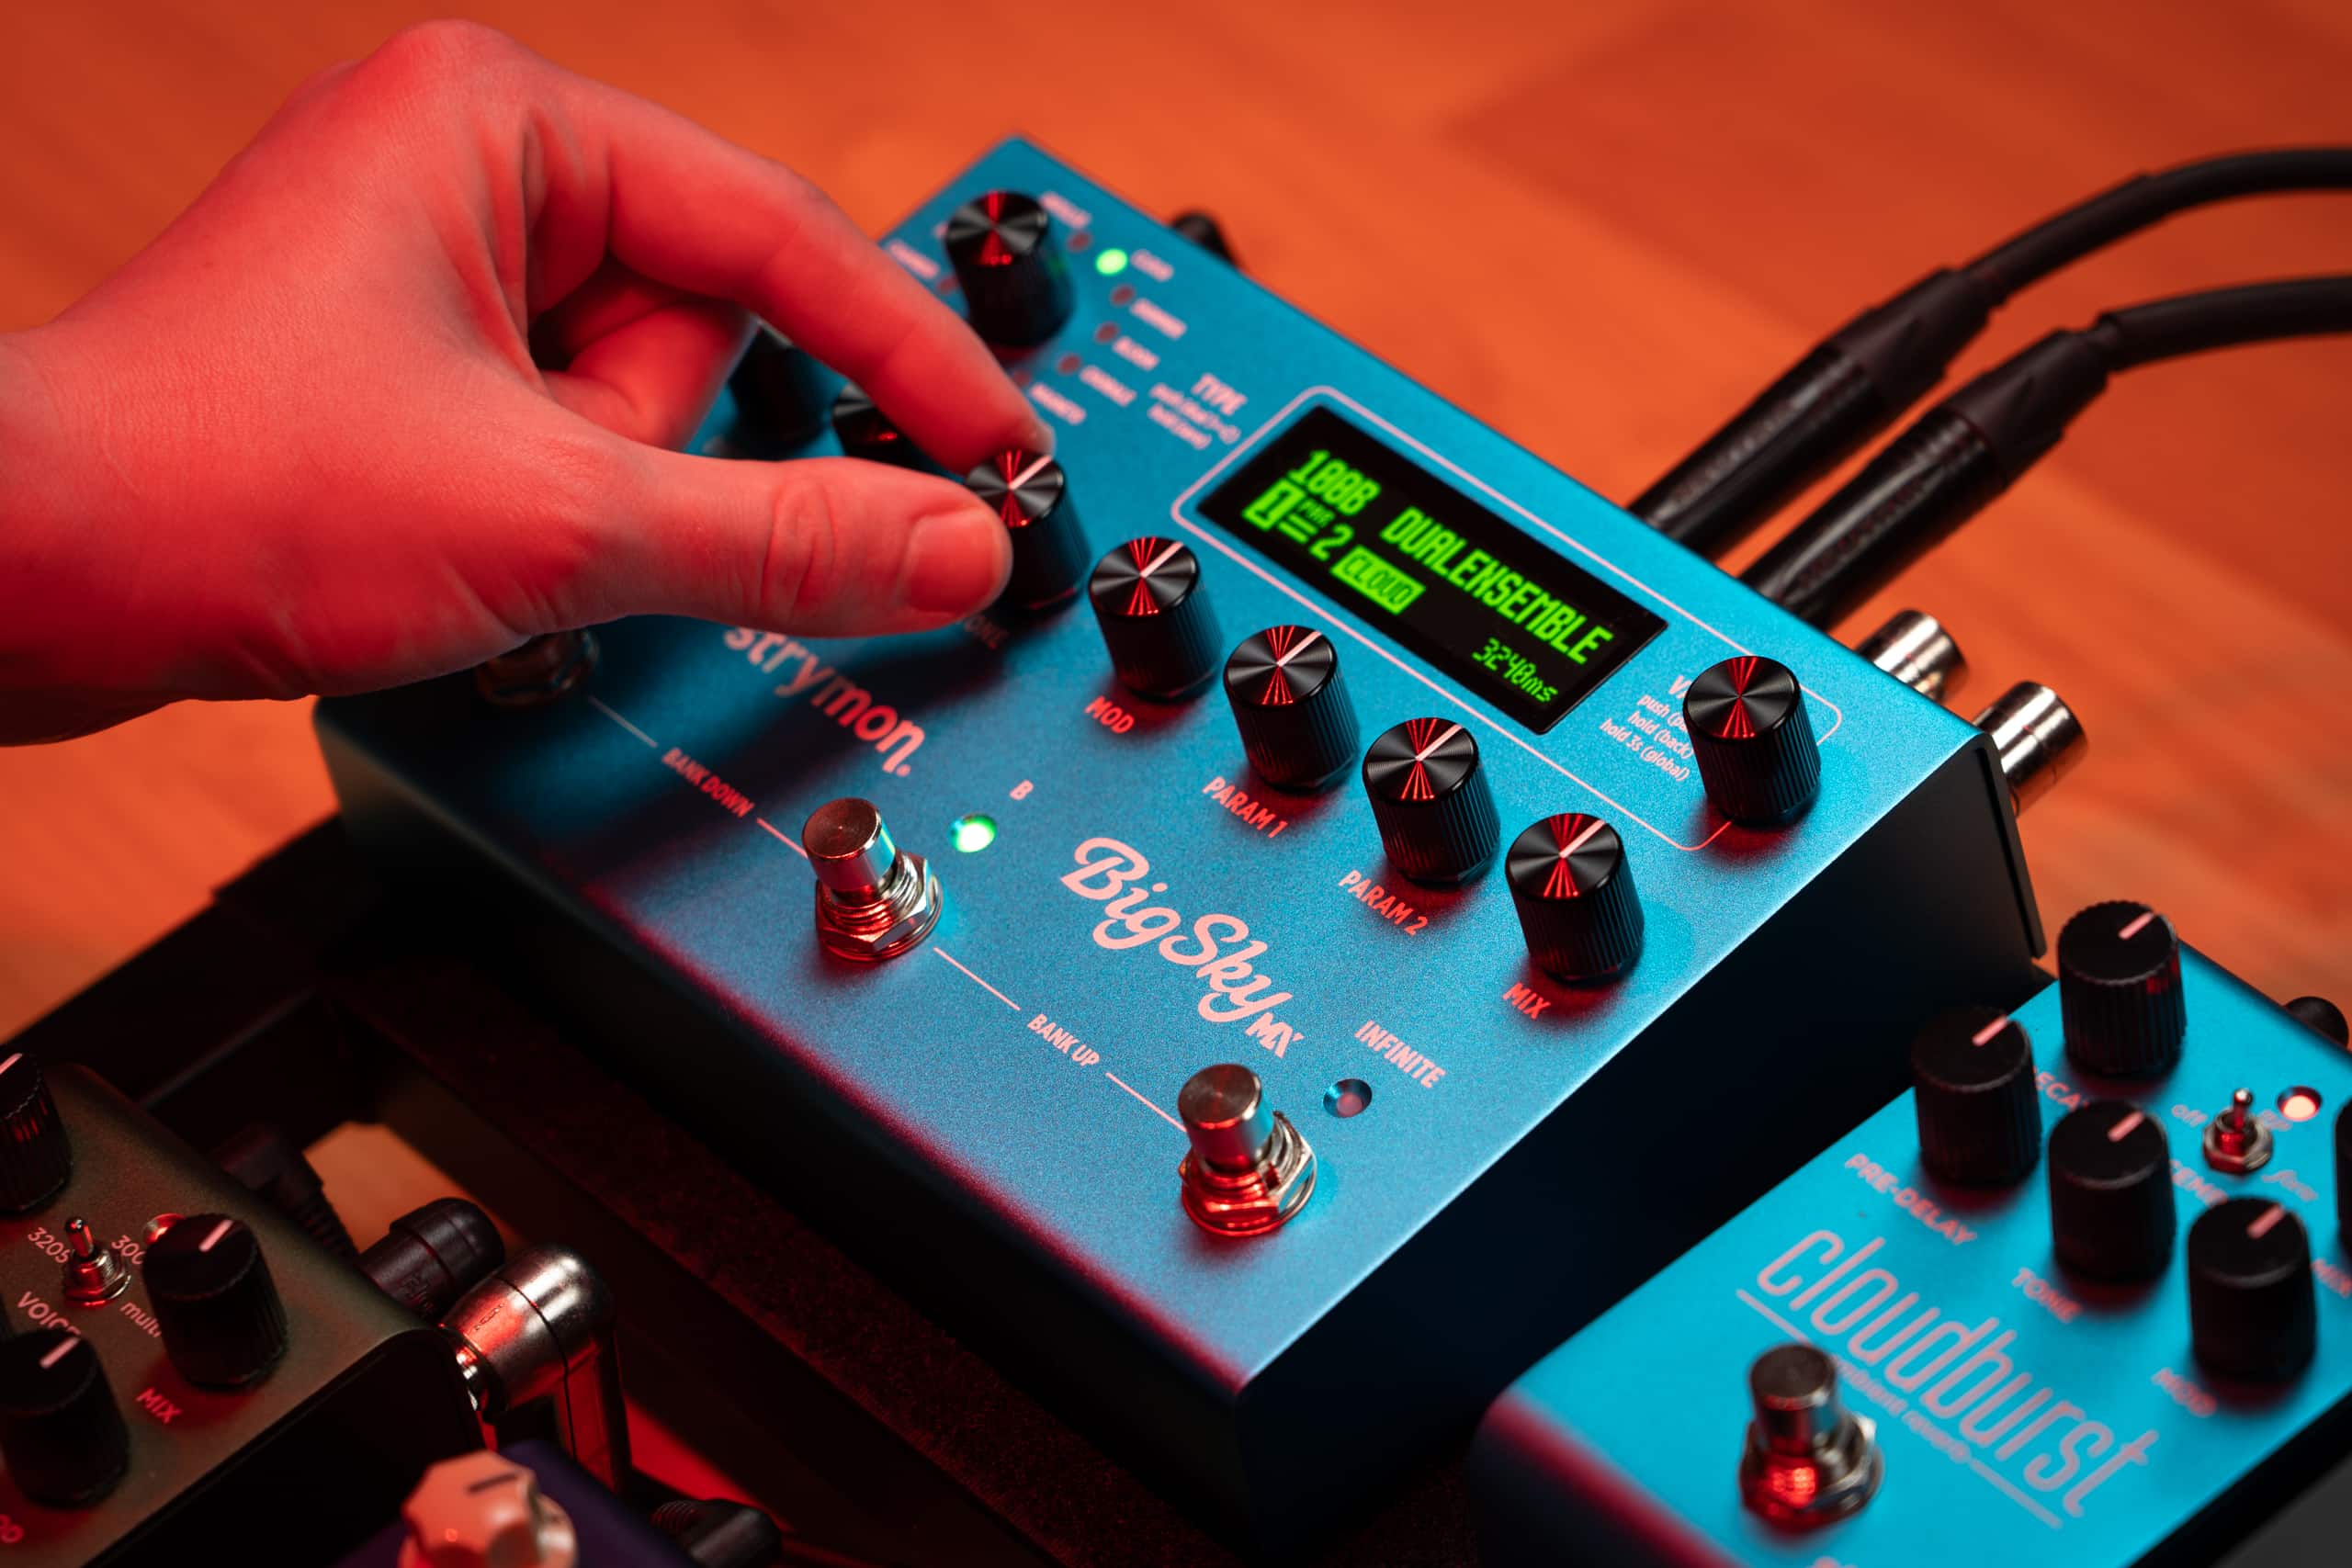 BigSky MX being used on stage. A hand is reaching over and grabbing one of its knobs.